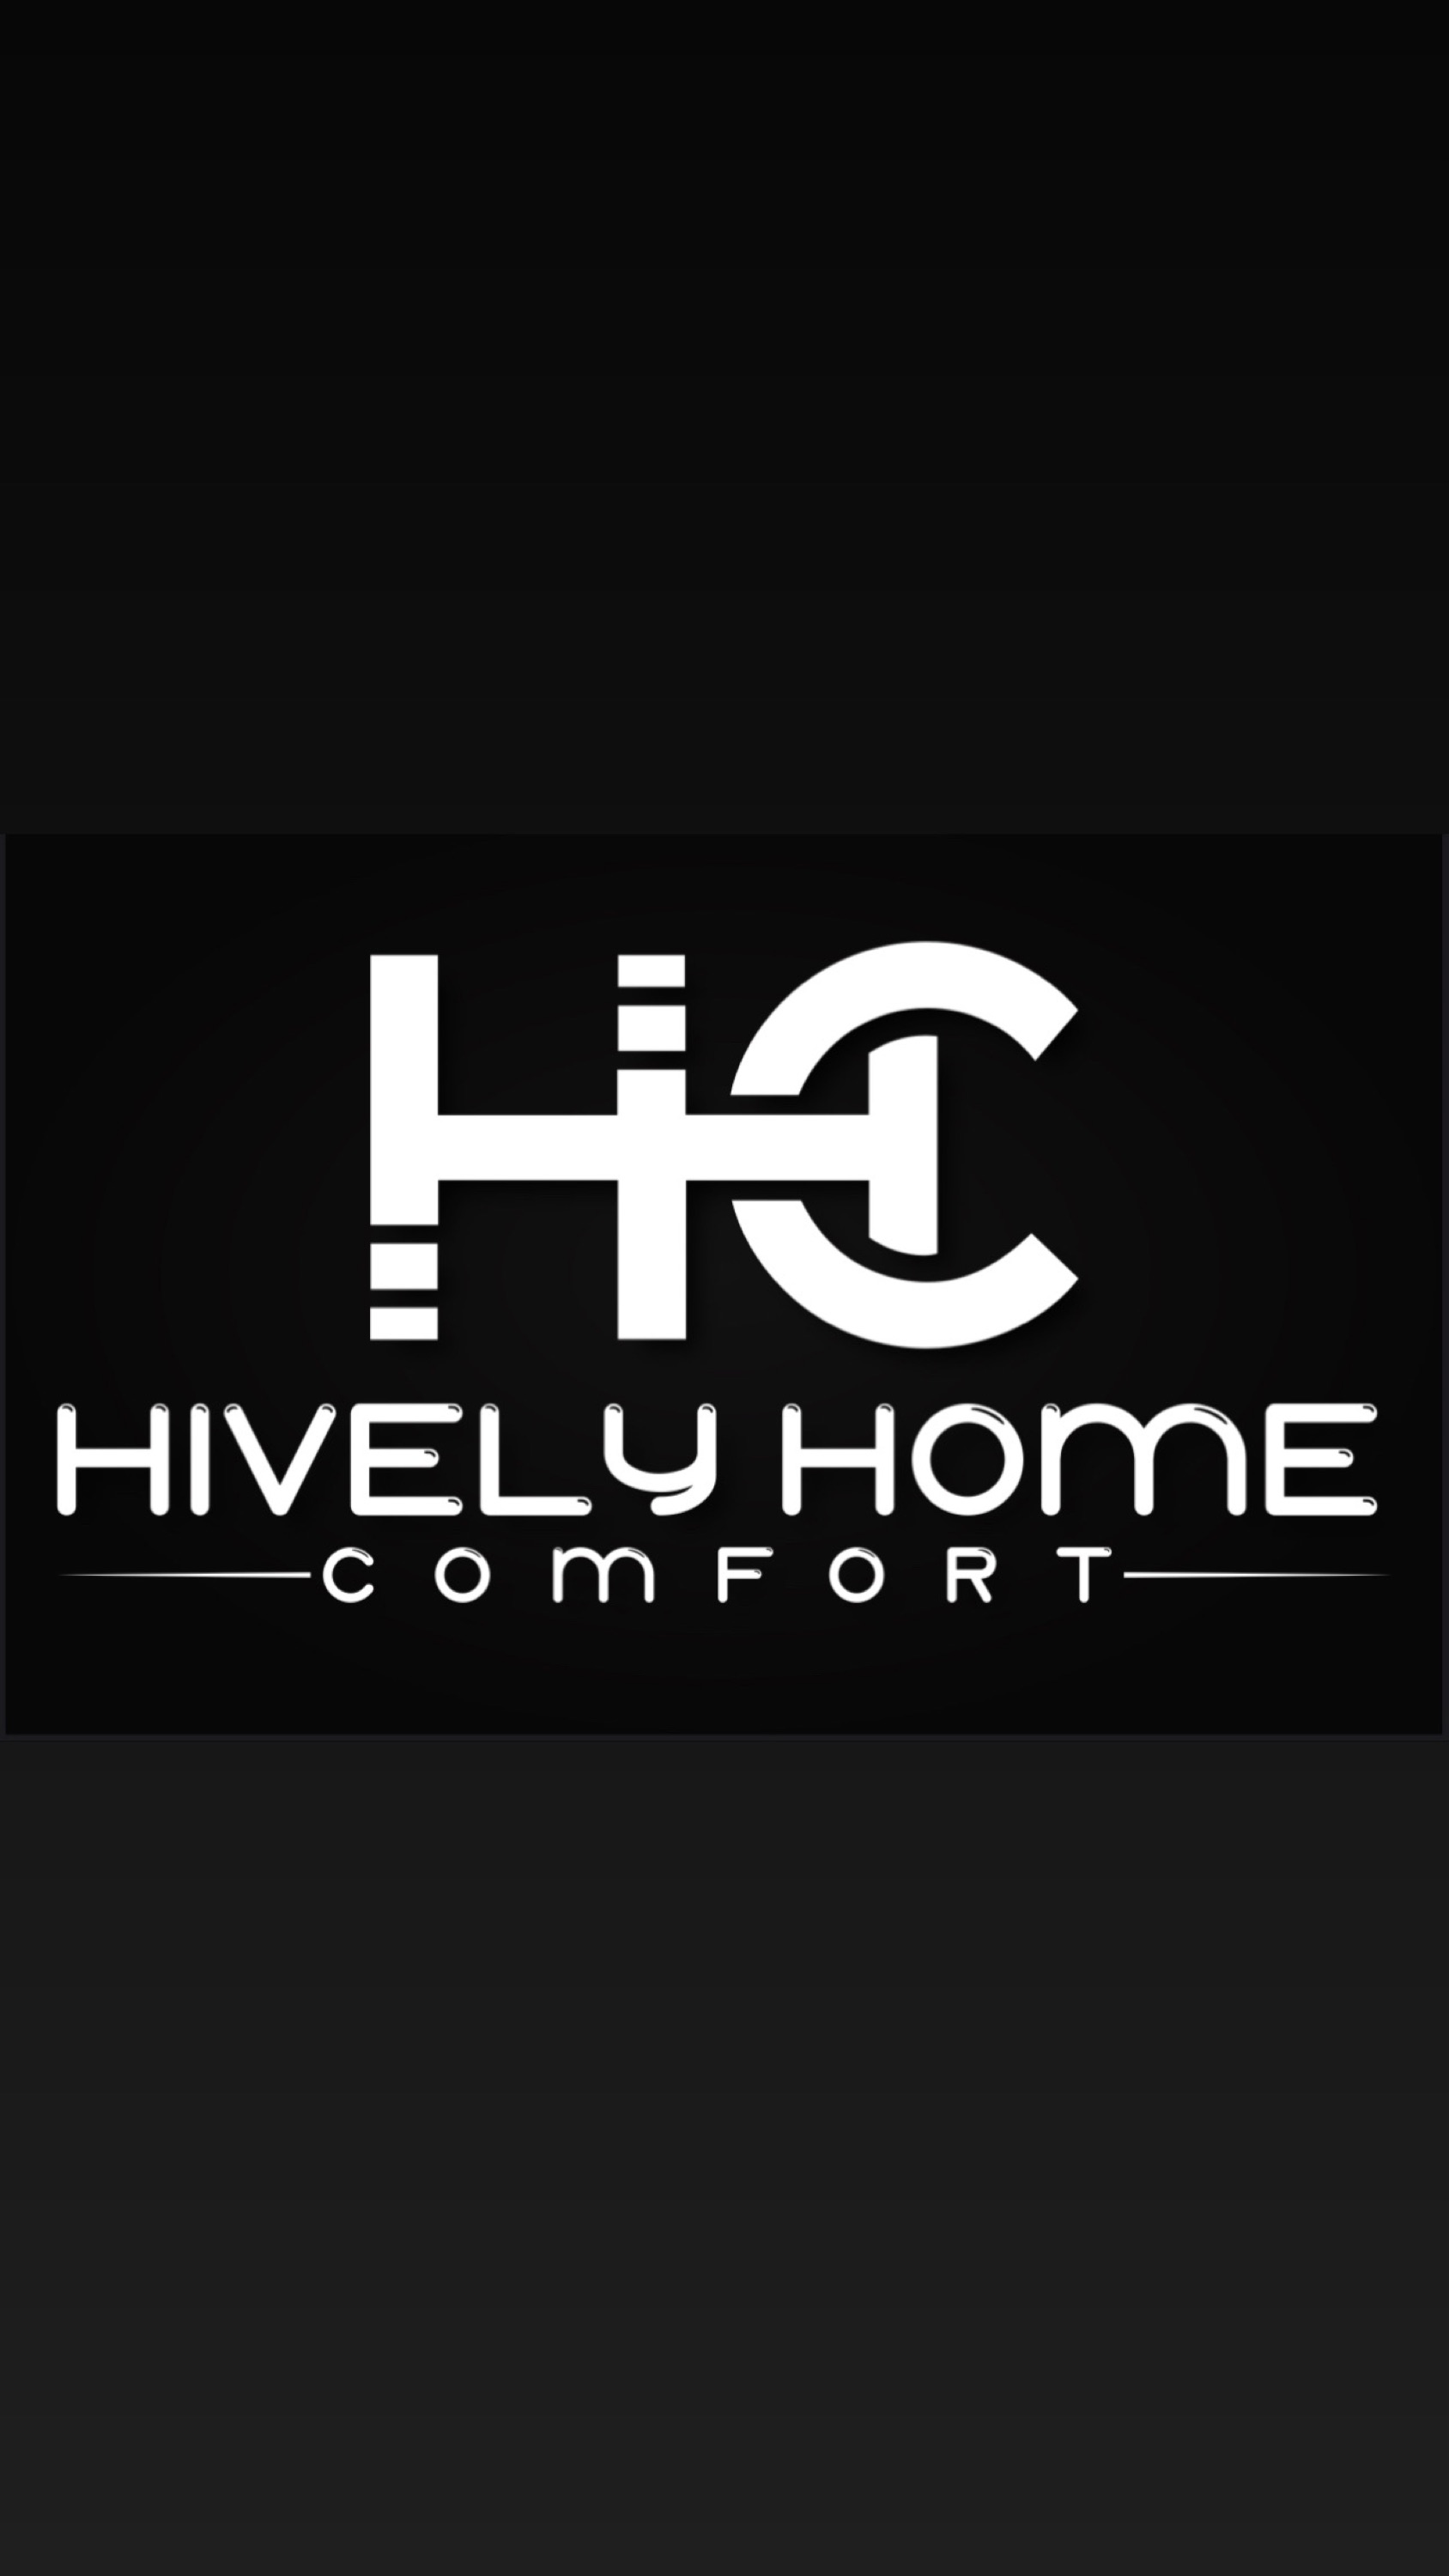 Hively Heating and Cooling Logo